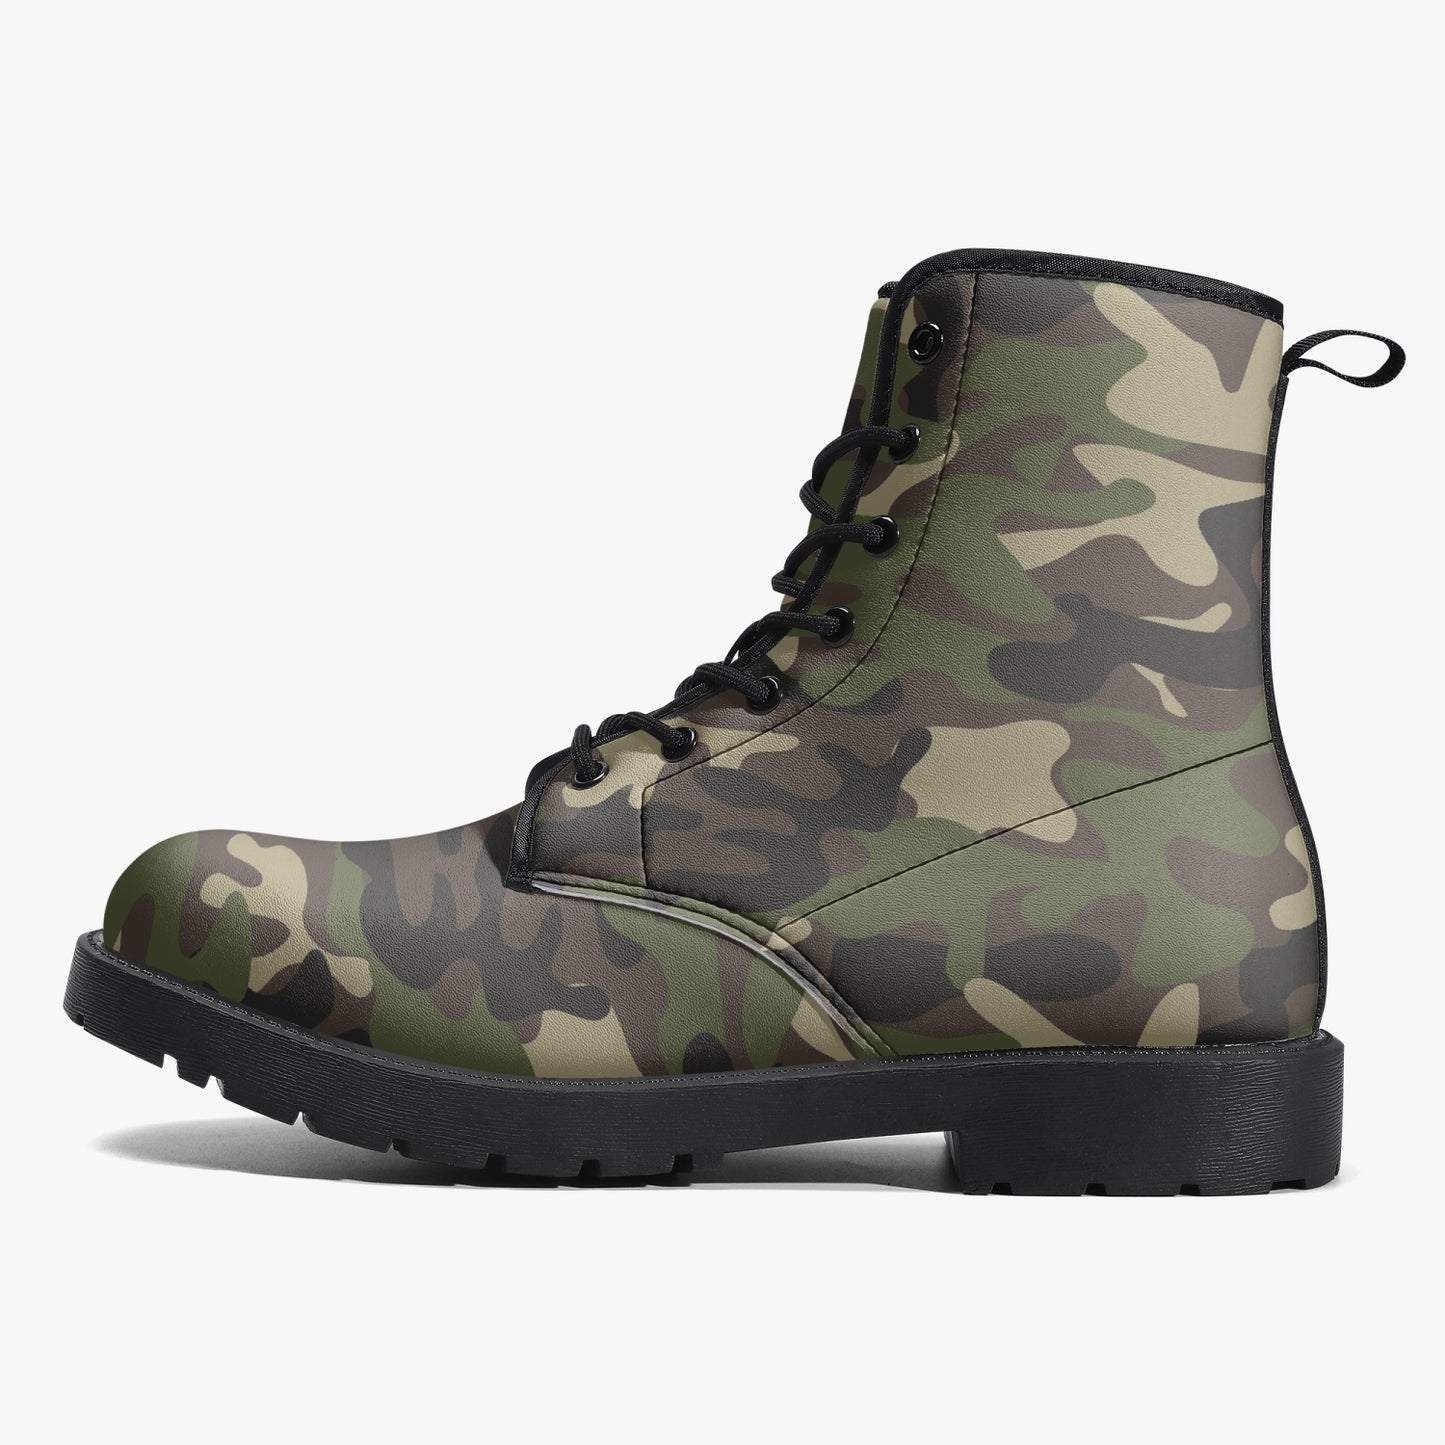 Camouflage Women Vegan Leather Combat Boots, Green Army Camo Lace Up Shoes Hiking Festival Black Ankle Work Winter Casual Custom